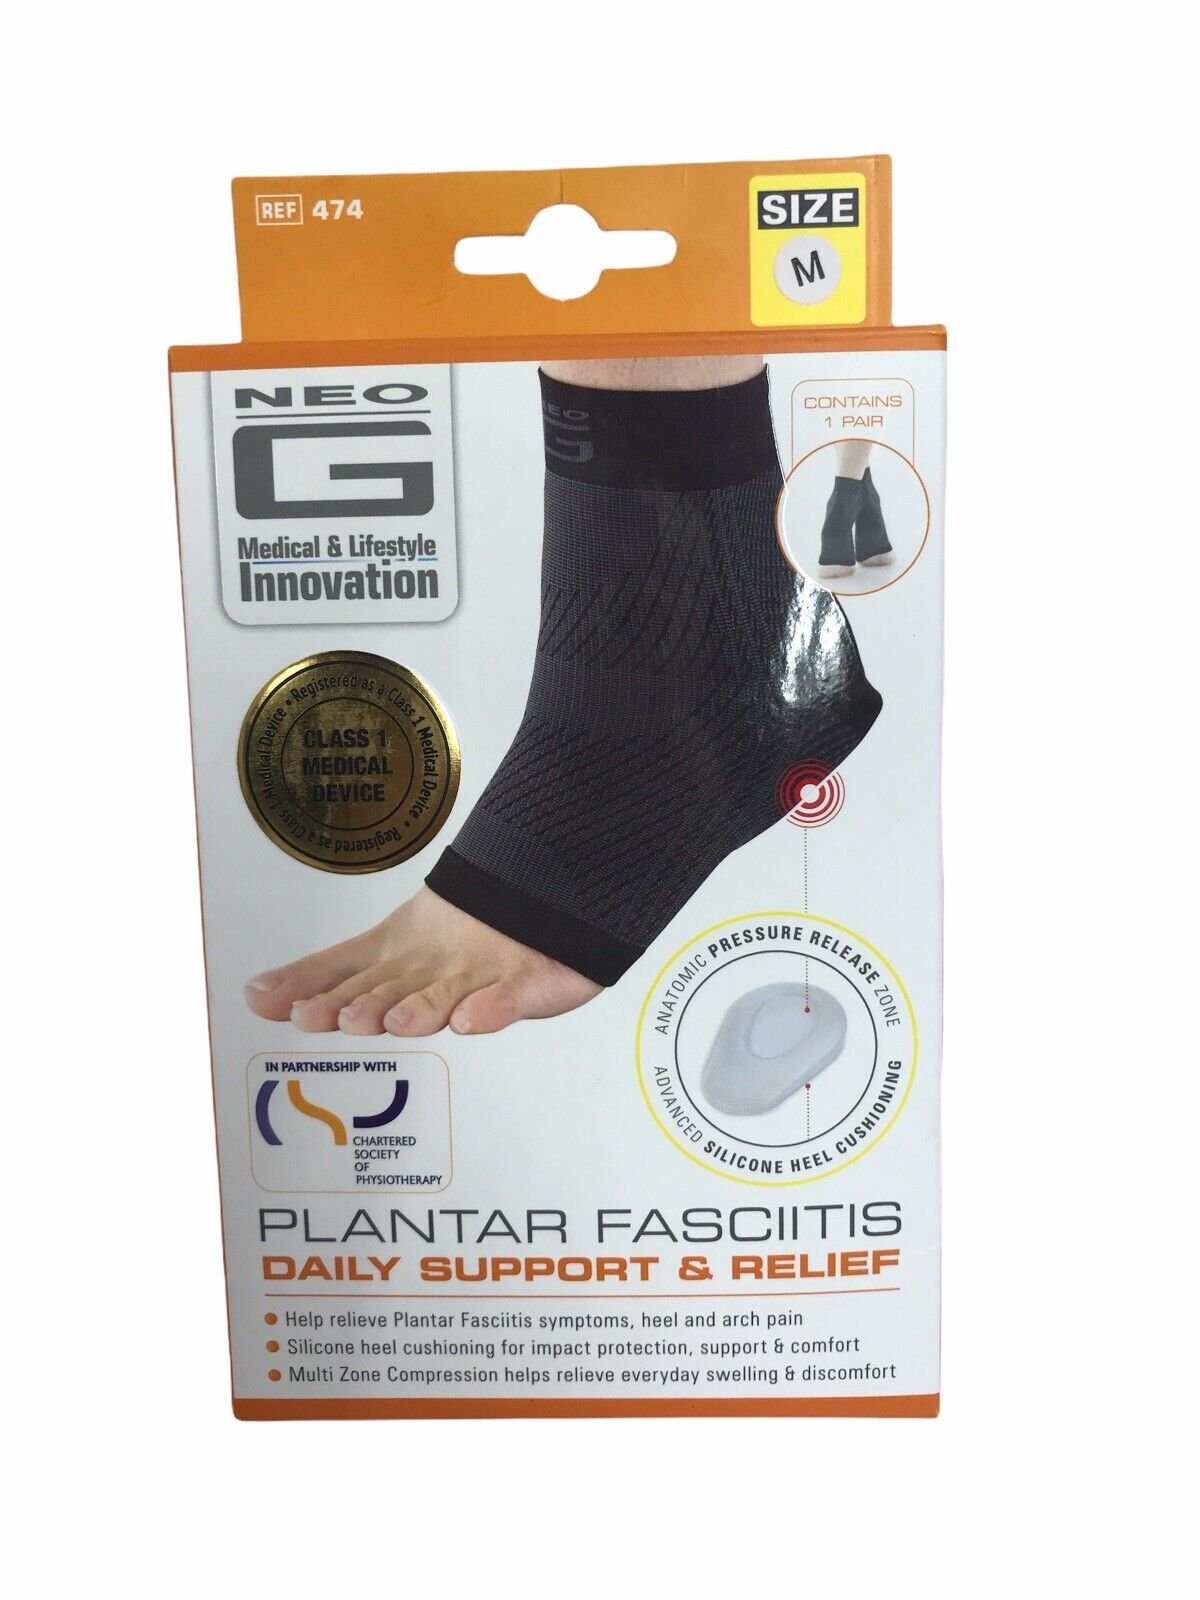 Neo G Plantar Fasciitis Daily Support & Pain Relief Medium Foot Ankle Wrap New